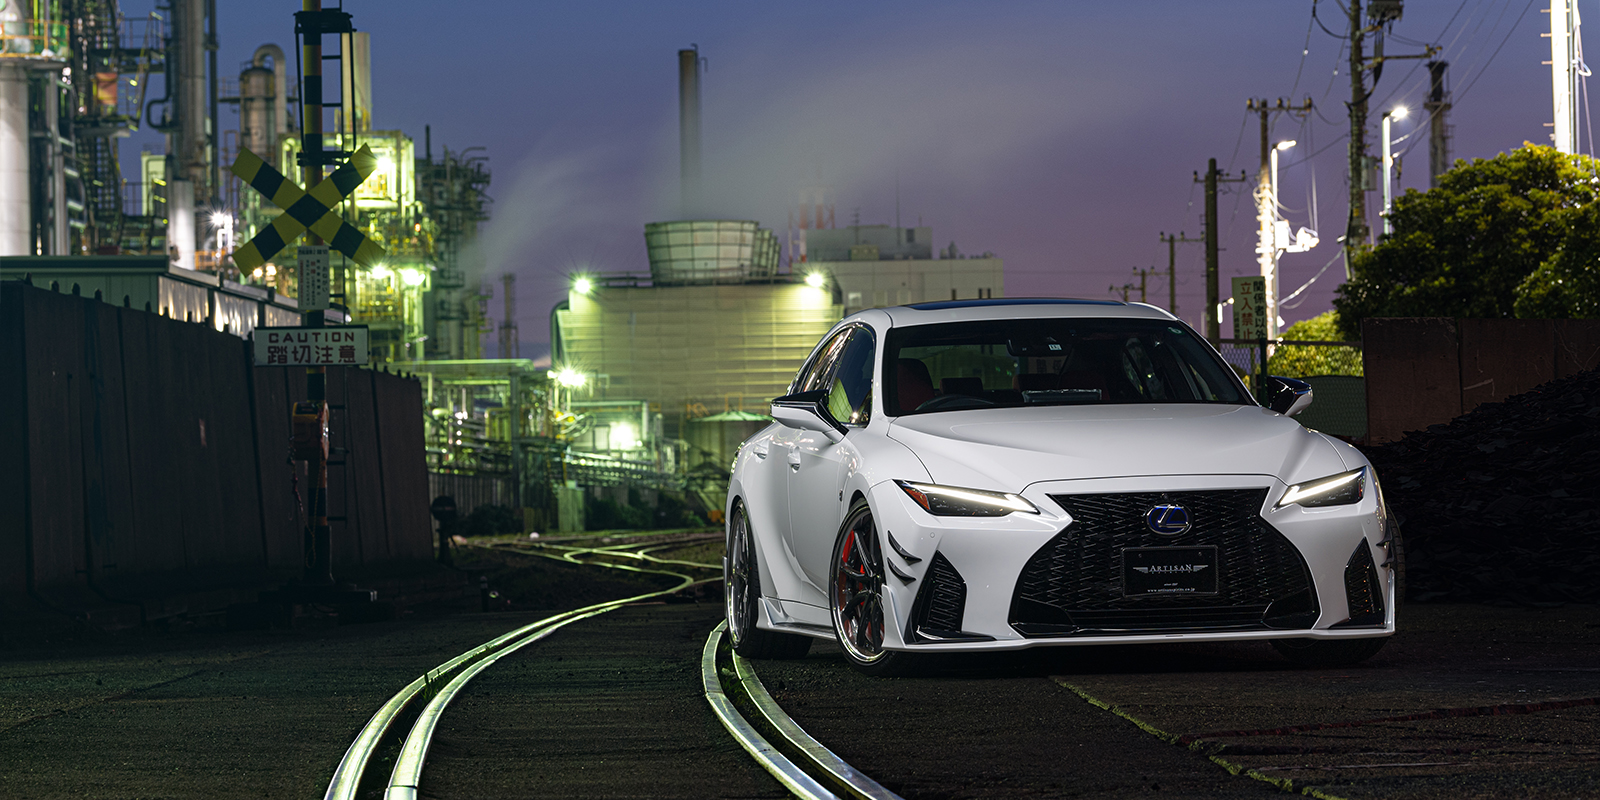 Check our price and buy Artisan Spirits body kit for Lexus IS F-Sport